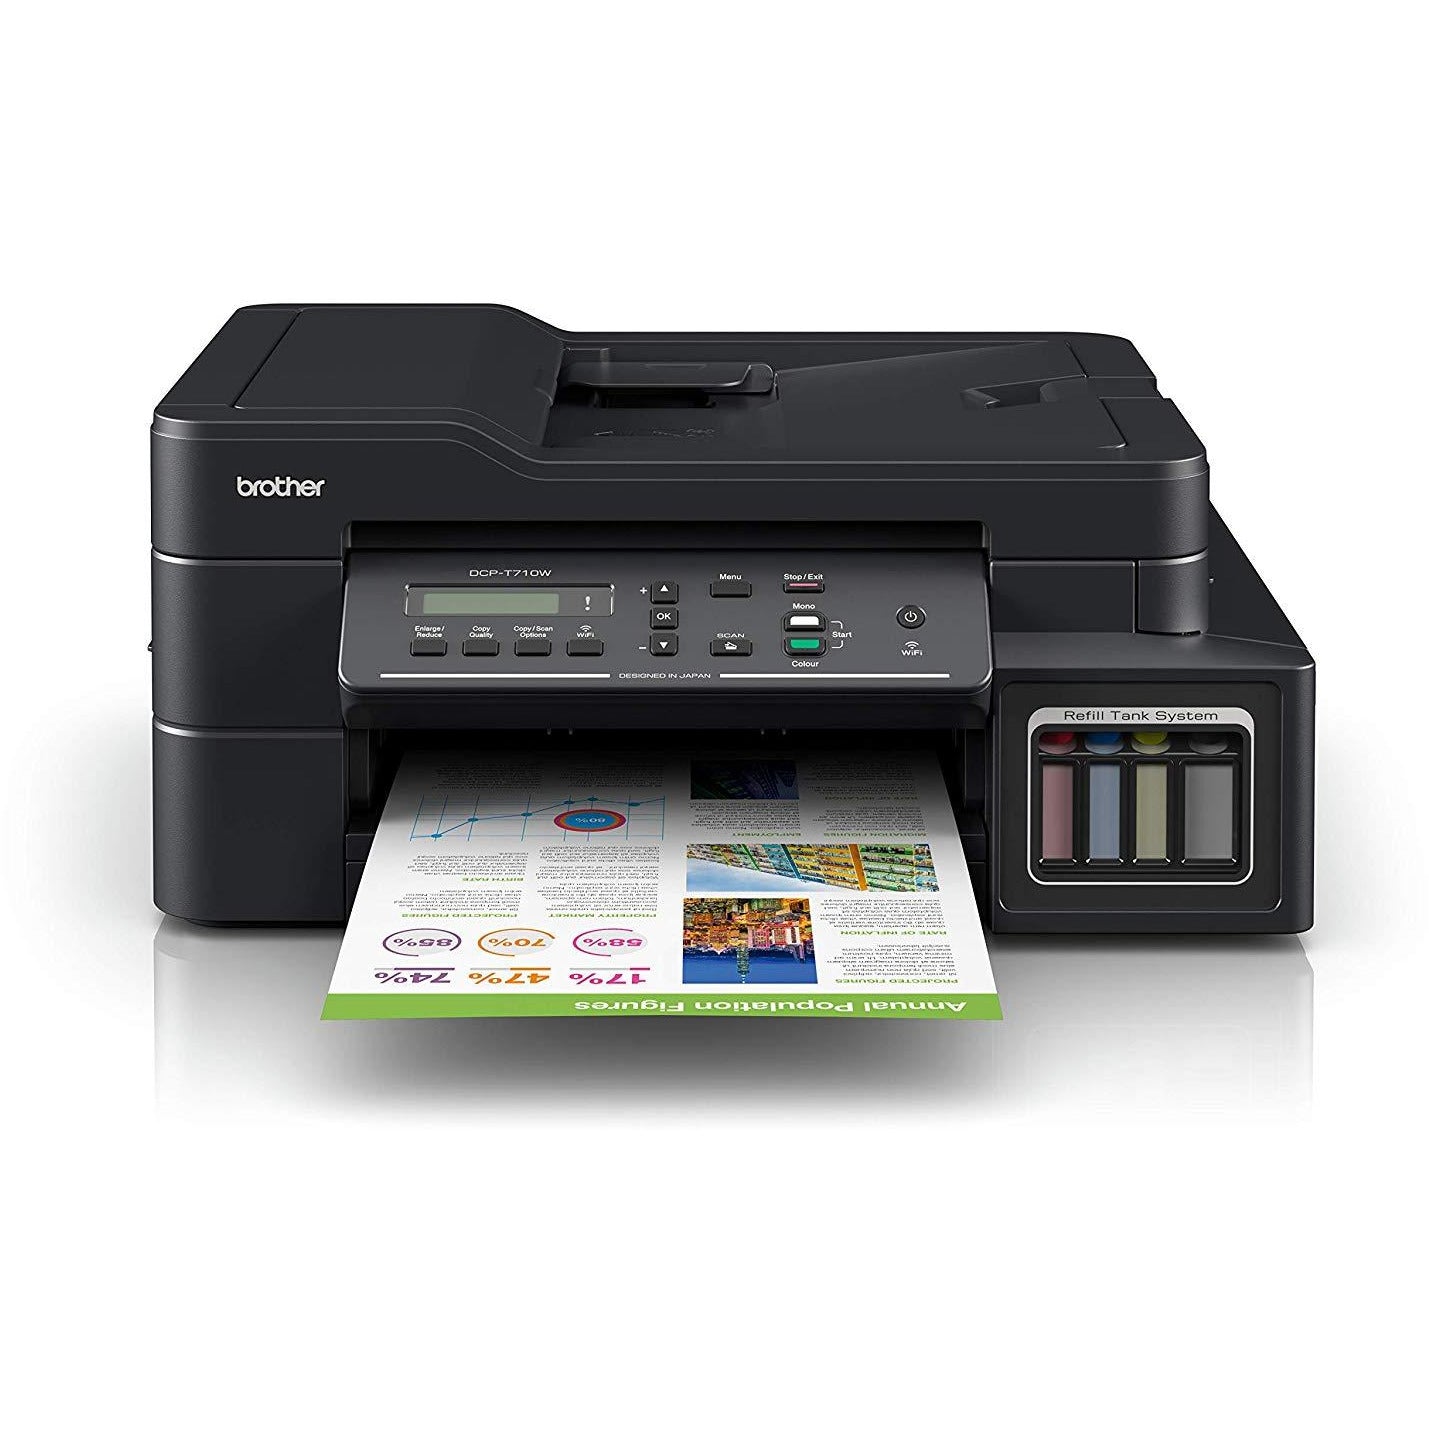 Printing devices. Принтер brother DCP-t820dw. Epson l3150. Brother DCP-t820dw INKBENEFIT Plus, цветн., a4. Принтер brother 810w.